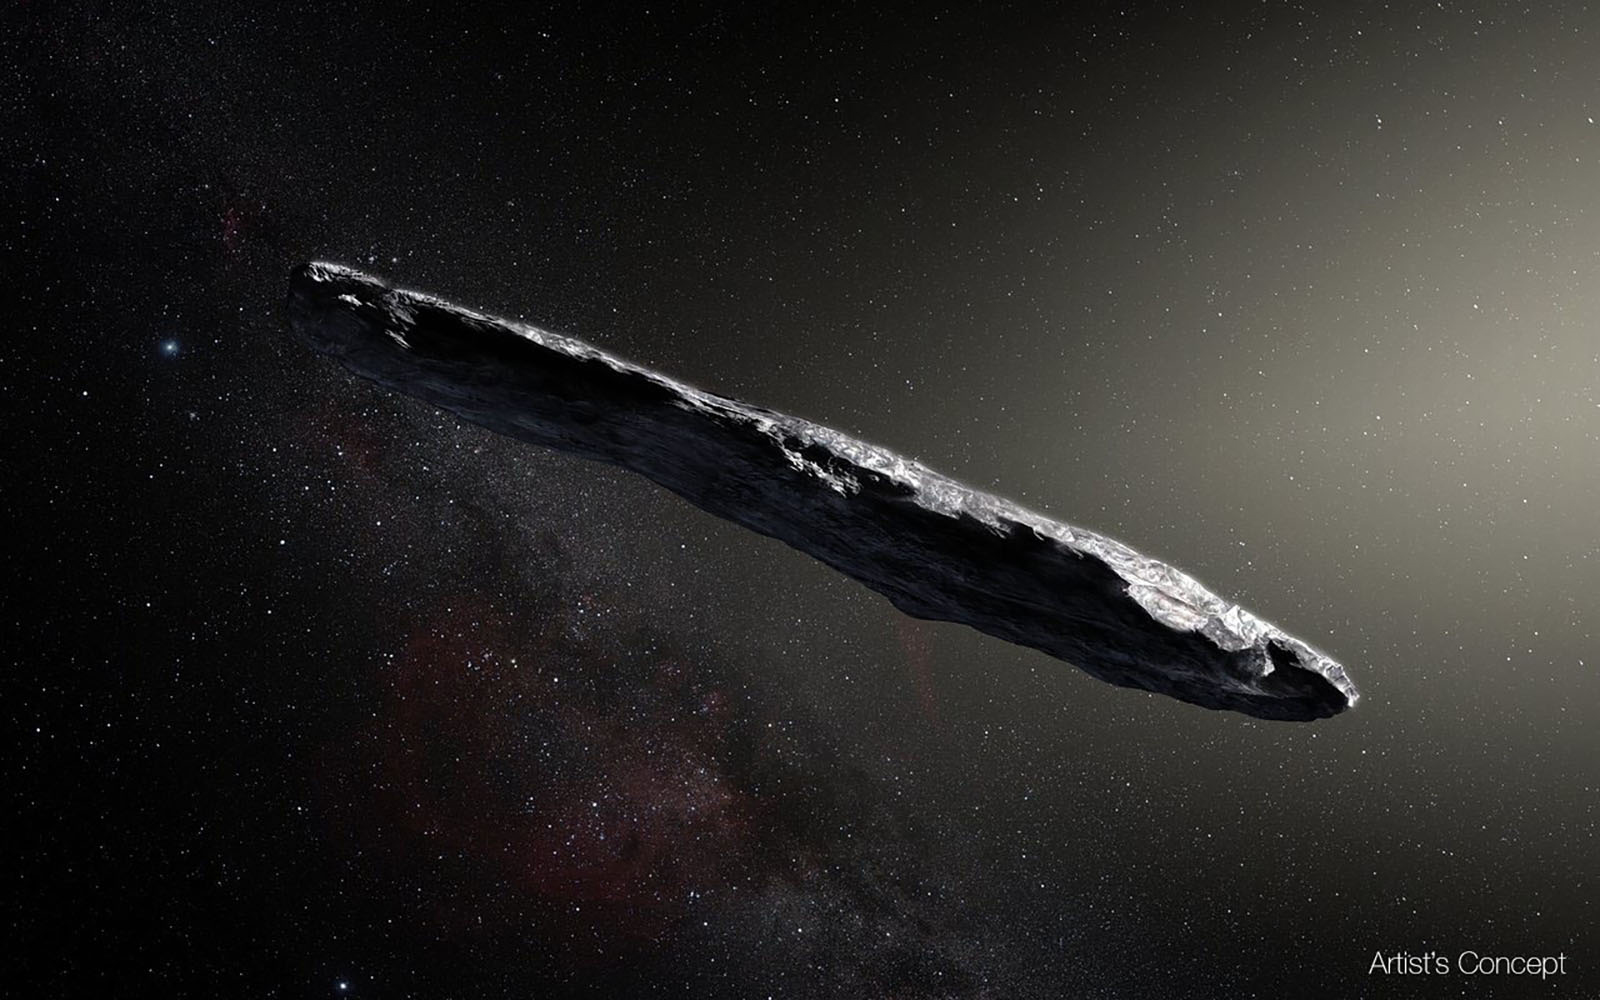 Artist’s concept of interstellar asteroid 1I/2017 U1 (‘Oumuamua) as it passed through the solar system